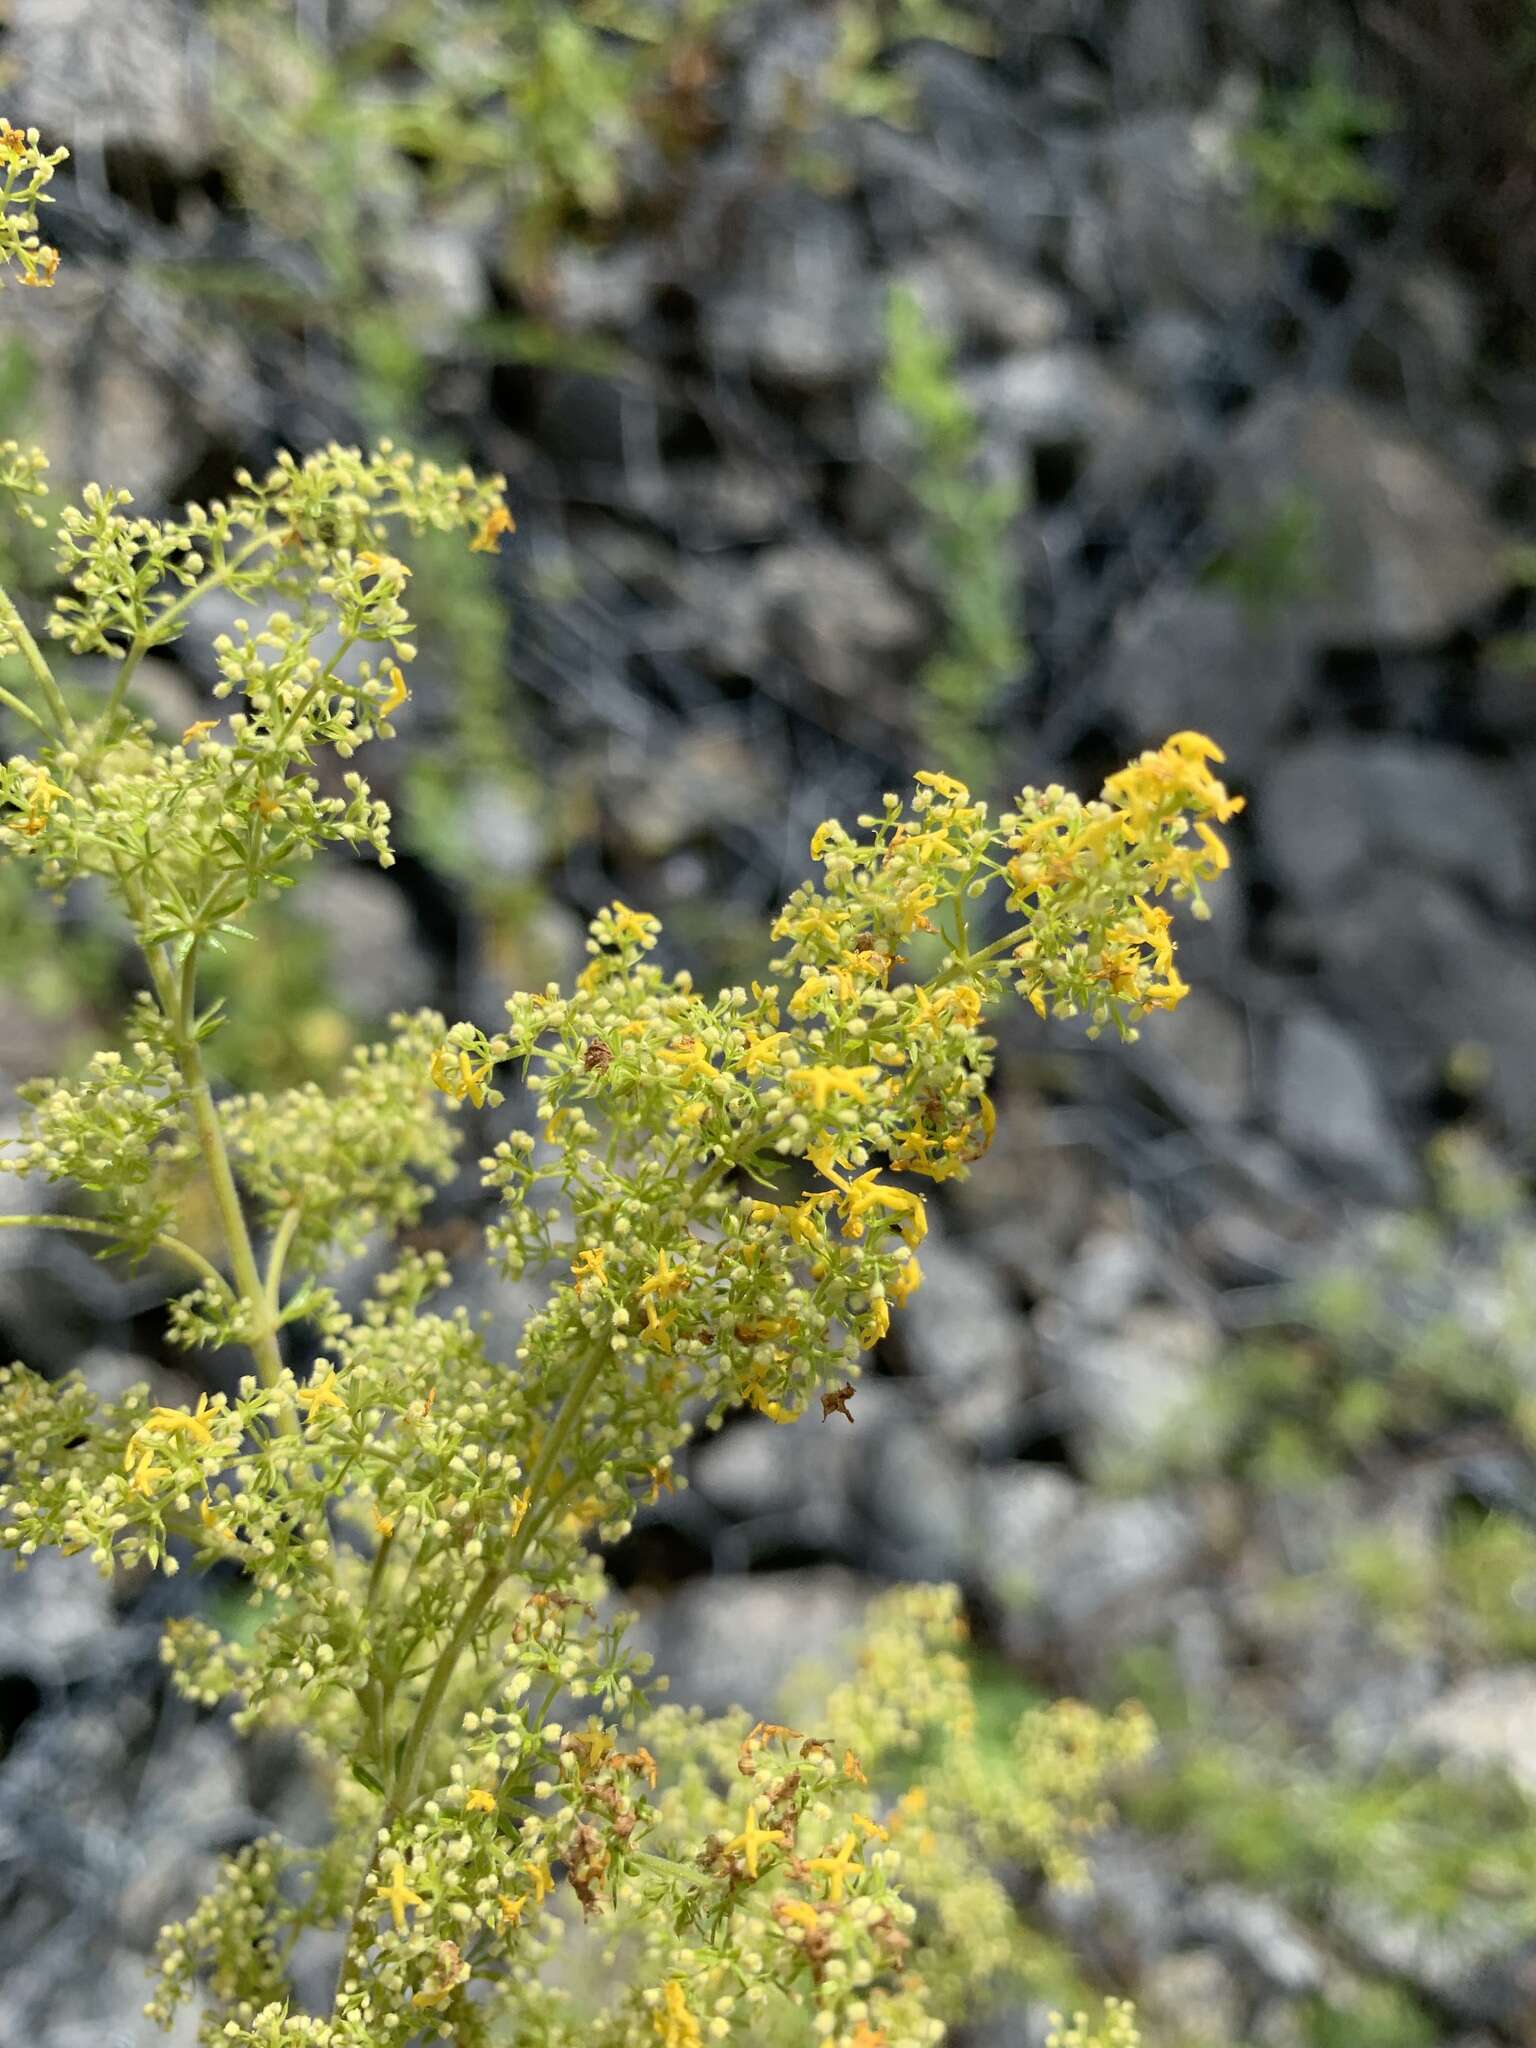 Image of Yellow Spring bedstraw